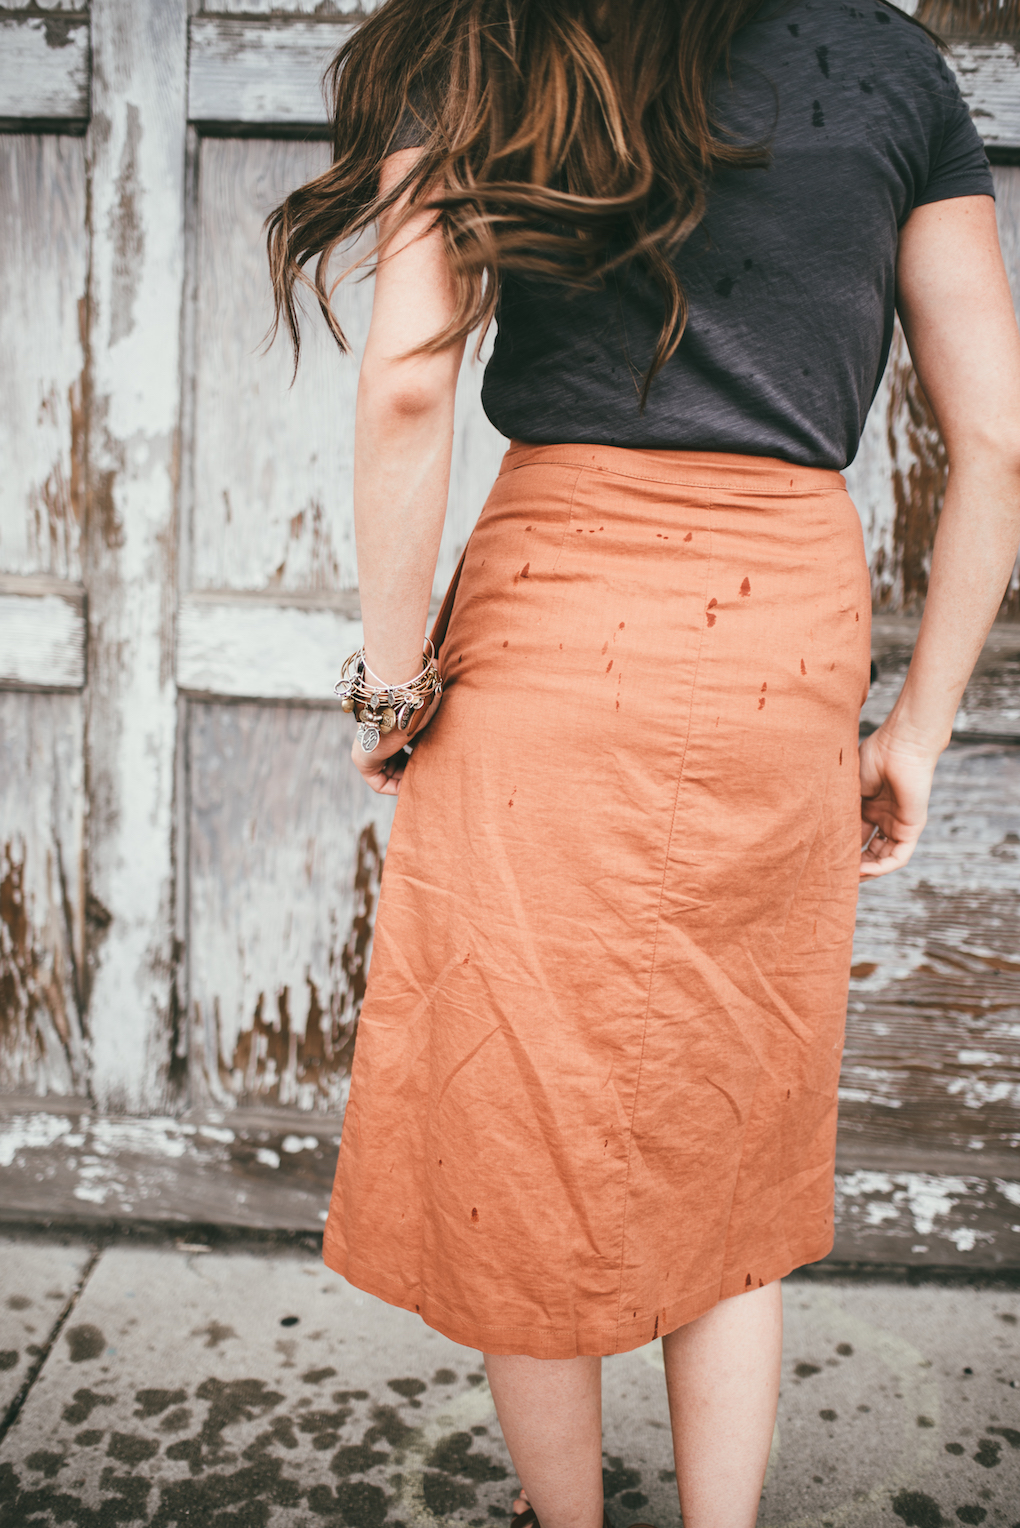 orange button up midi skirt with grey tee shirt girl standing in front of old distressed white garage door